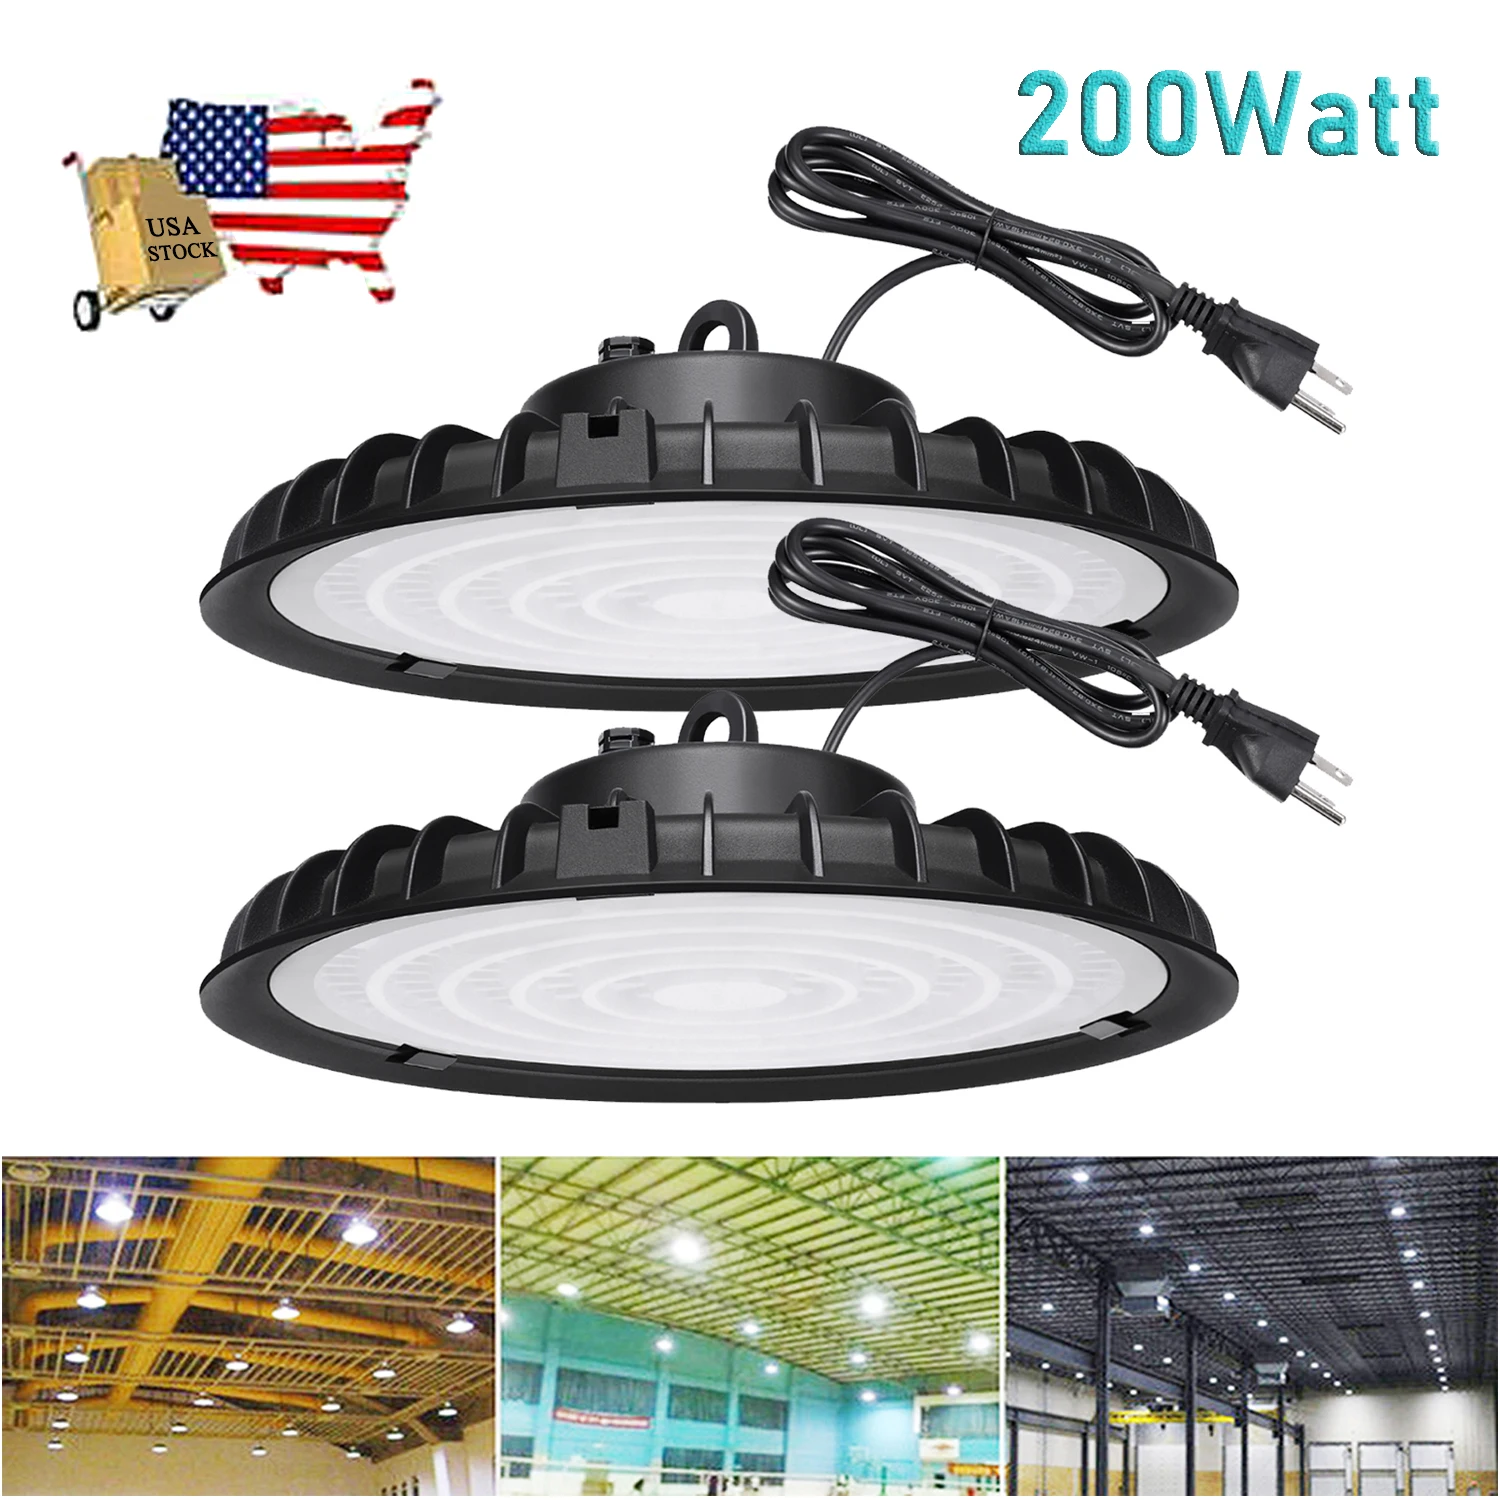 2 UFO Led High Bay Light US STOCK 200W Commercial Industrial Warehouse Factory Lighting Fixture 6000K 200 Watts Gym Shop Lamp